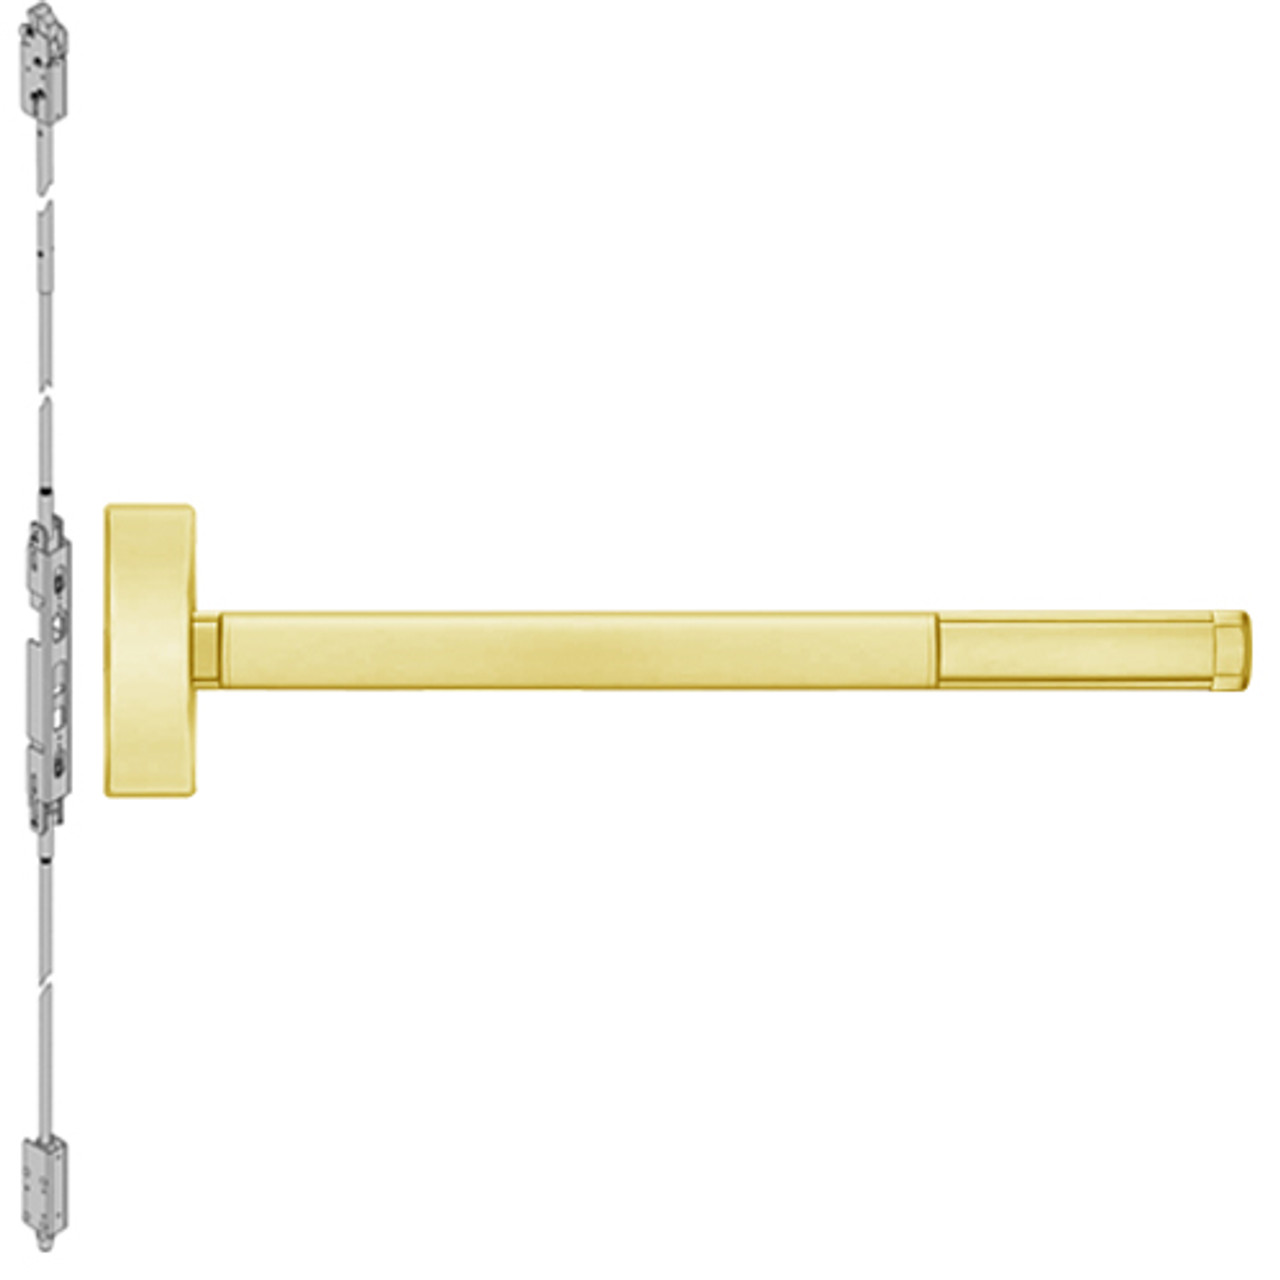 2808LBR-605-36 PHI 2800 Series Non Fire Rated Concealed Vertical Rod Exit Device Prepped for Key Controls Lever-Knob in Bright Brass Finish